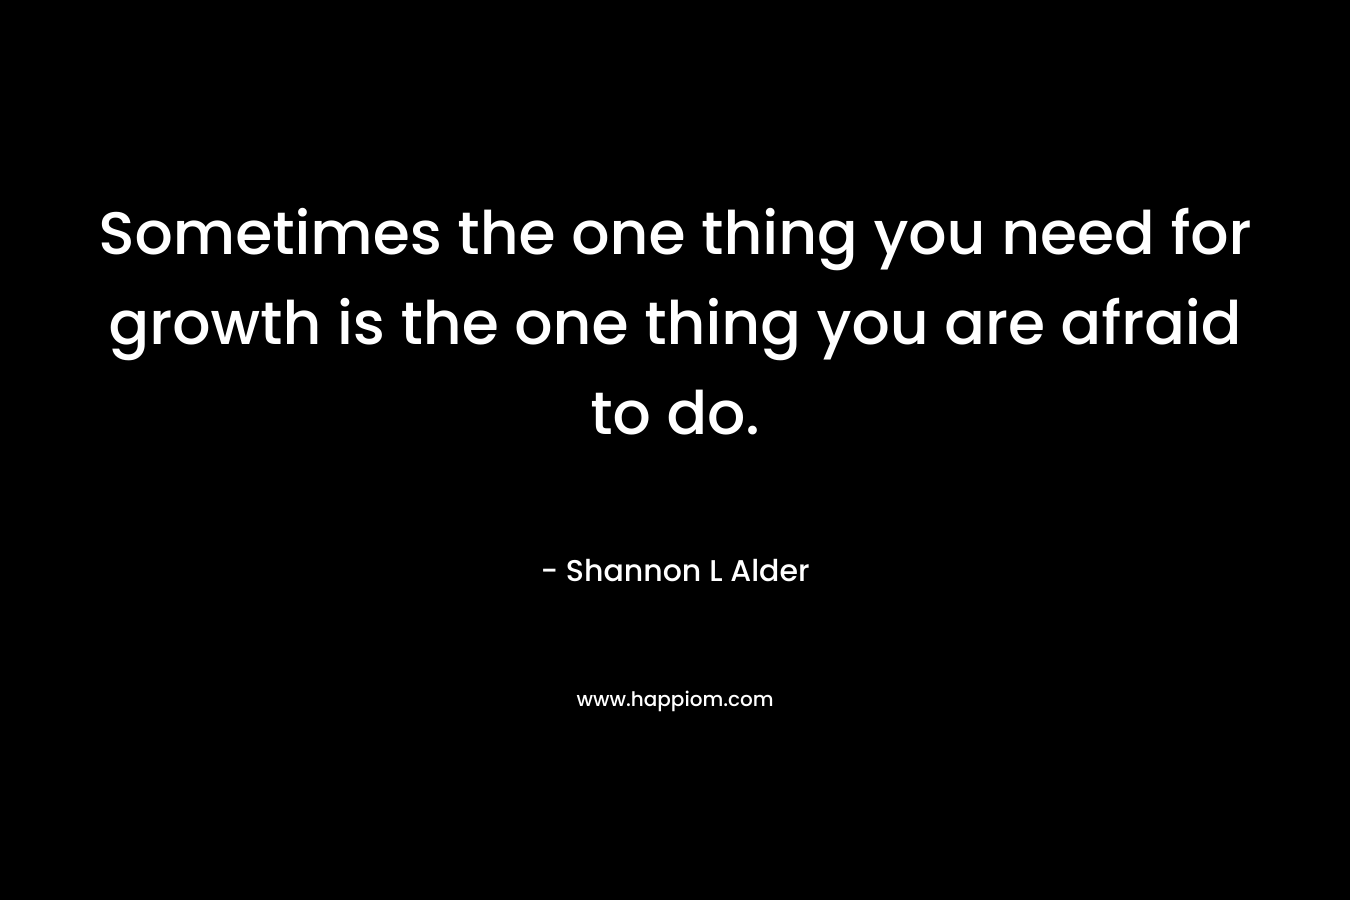 Sometimes the one thing you need for growth is the one thing you are afraid to do.